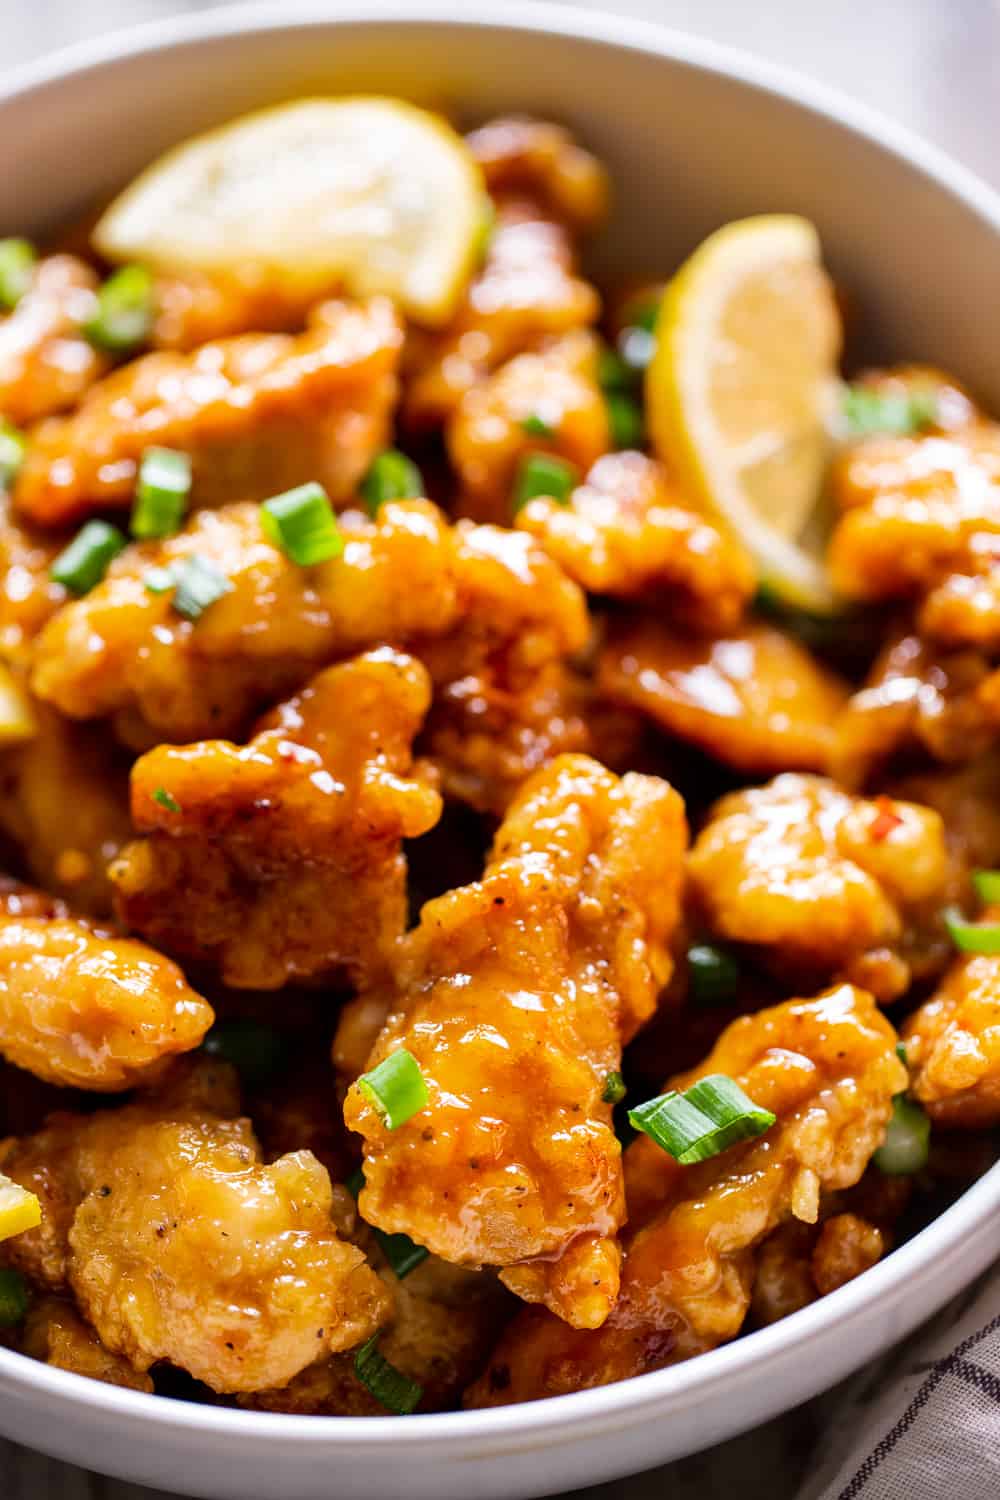 This flavor packed Paleo Chinese Lemon Chicken is a healthier homemade version of a takeout favorite! It’s easy to make and contains no refined sugar, family approved and seriously tasty with a Whole30 option.  Keep it Paleo and Whole30 by serving over sautéed cauliflower rice or with your favorite stir fried veggies. #paleo #paleorecipes #cleaneating 